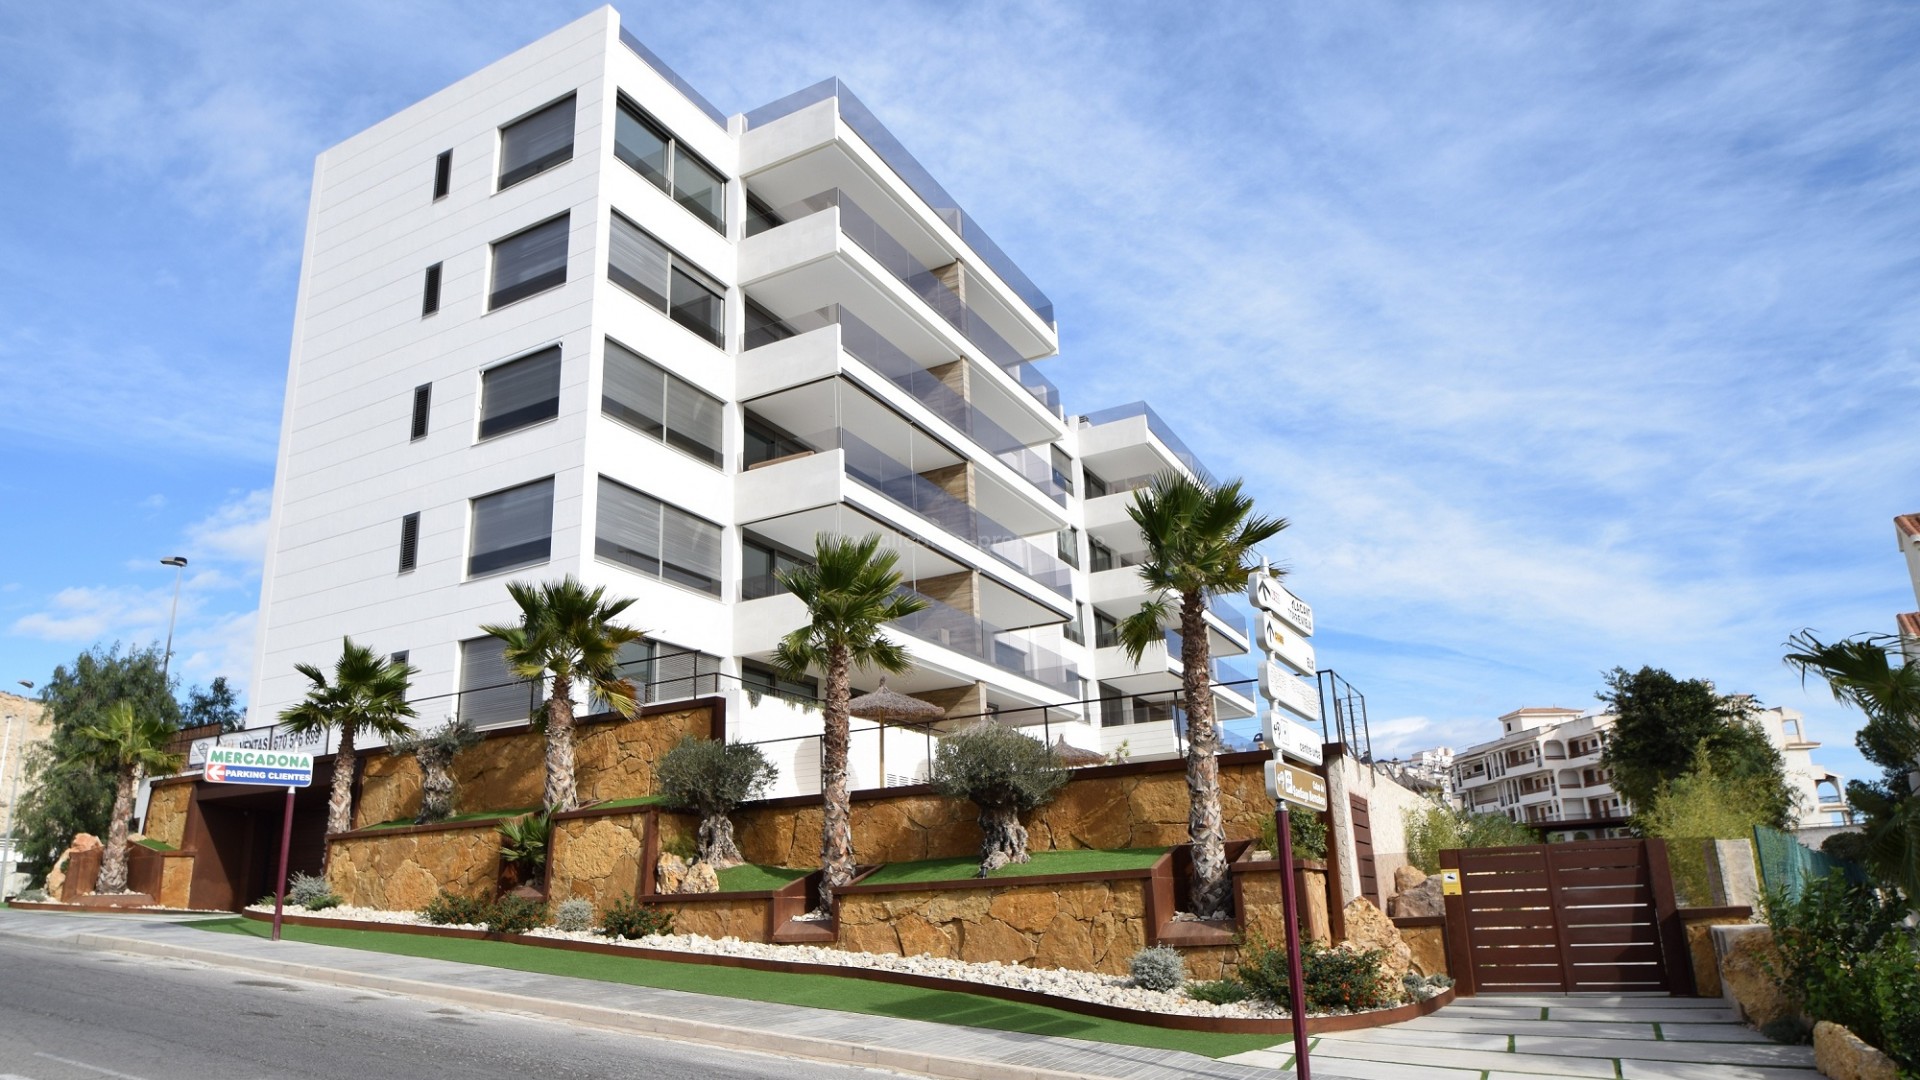 20 new modern apartments Santa Pola, 3 bedrooms, 2 bathrooms, large terrace with sea and ocean views, gym, 2 pools, play area in luxury residential area.